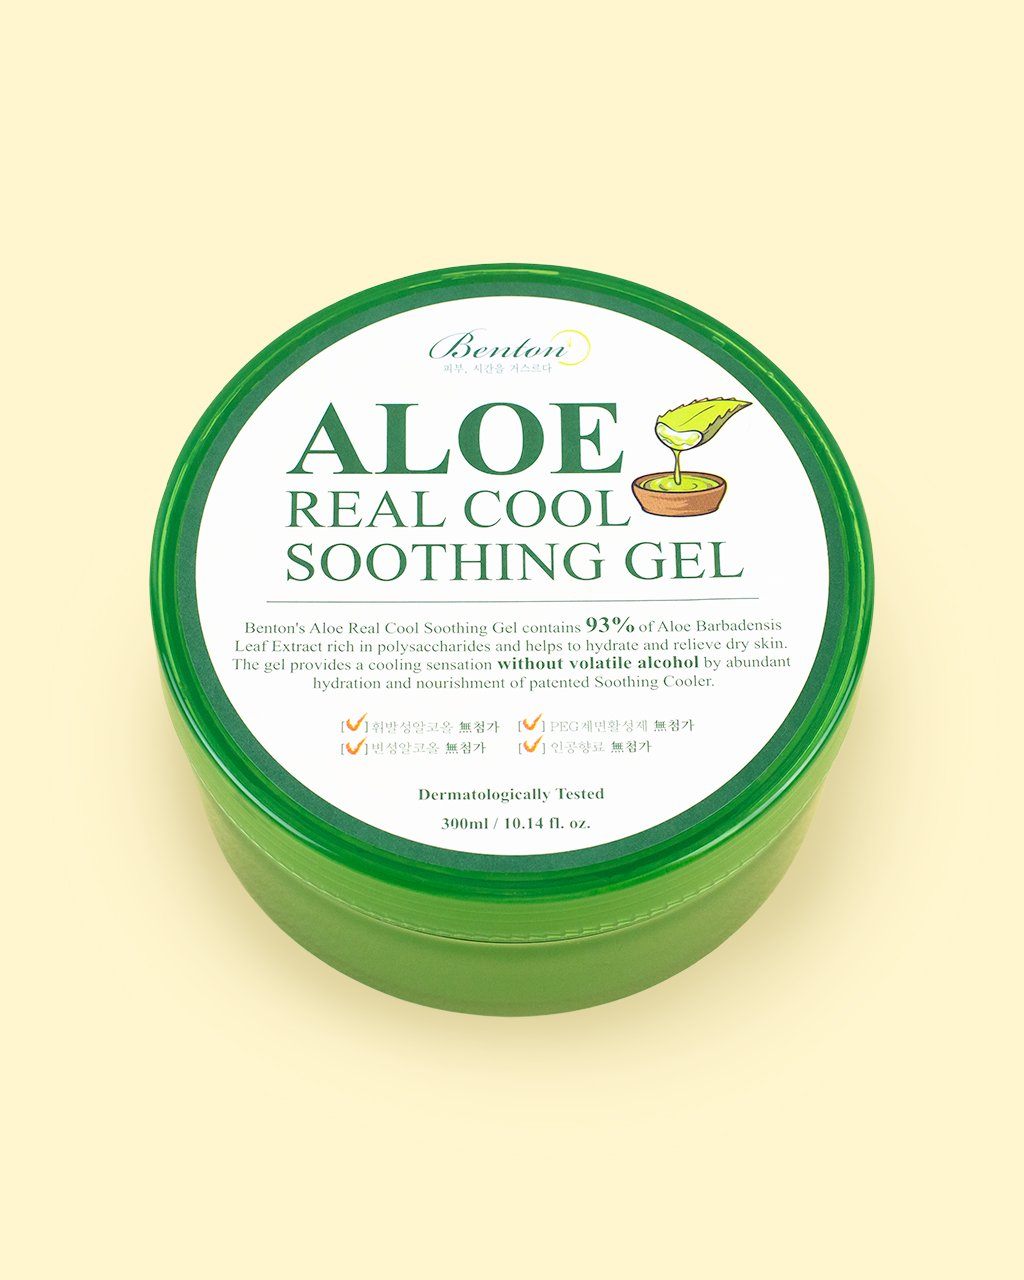 Aloe Real Cool Soothing Gel product